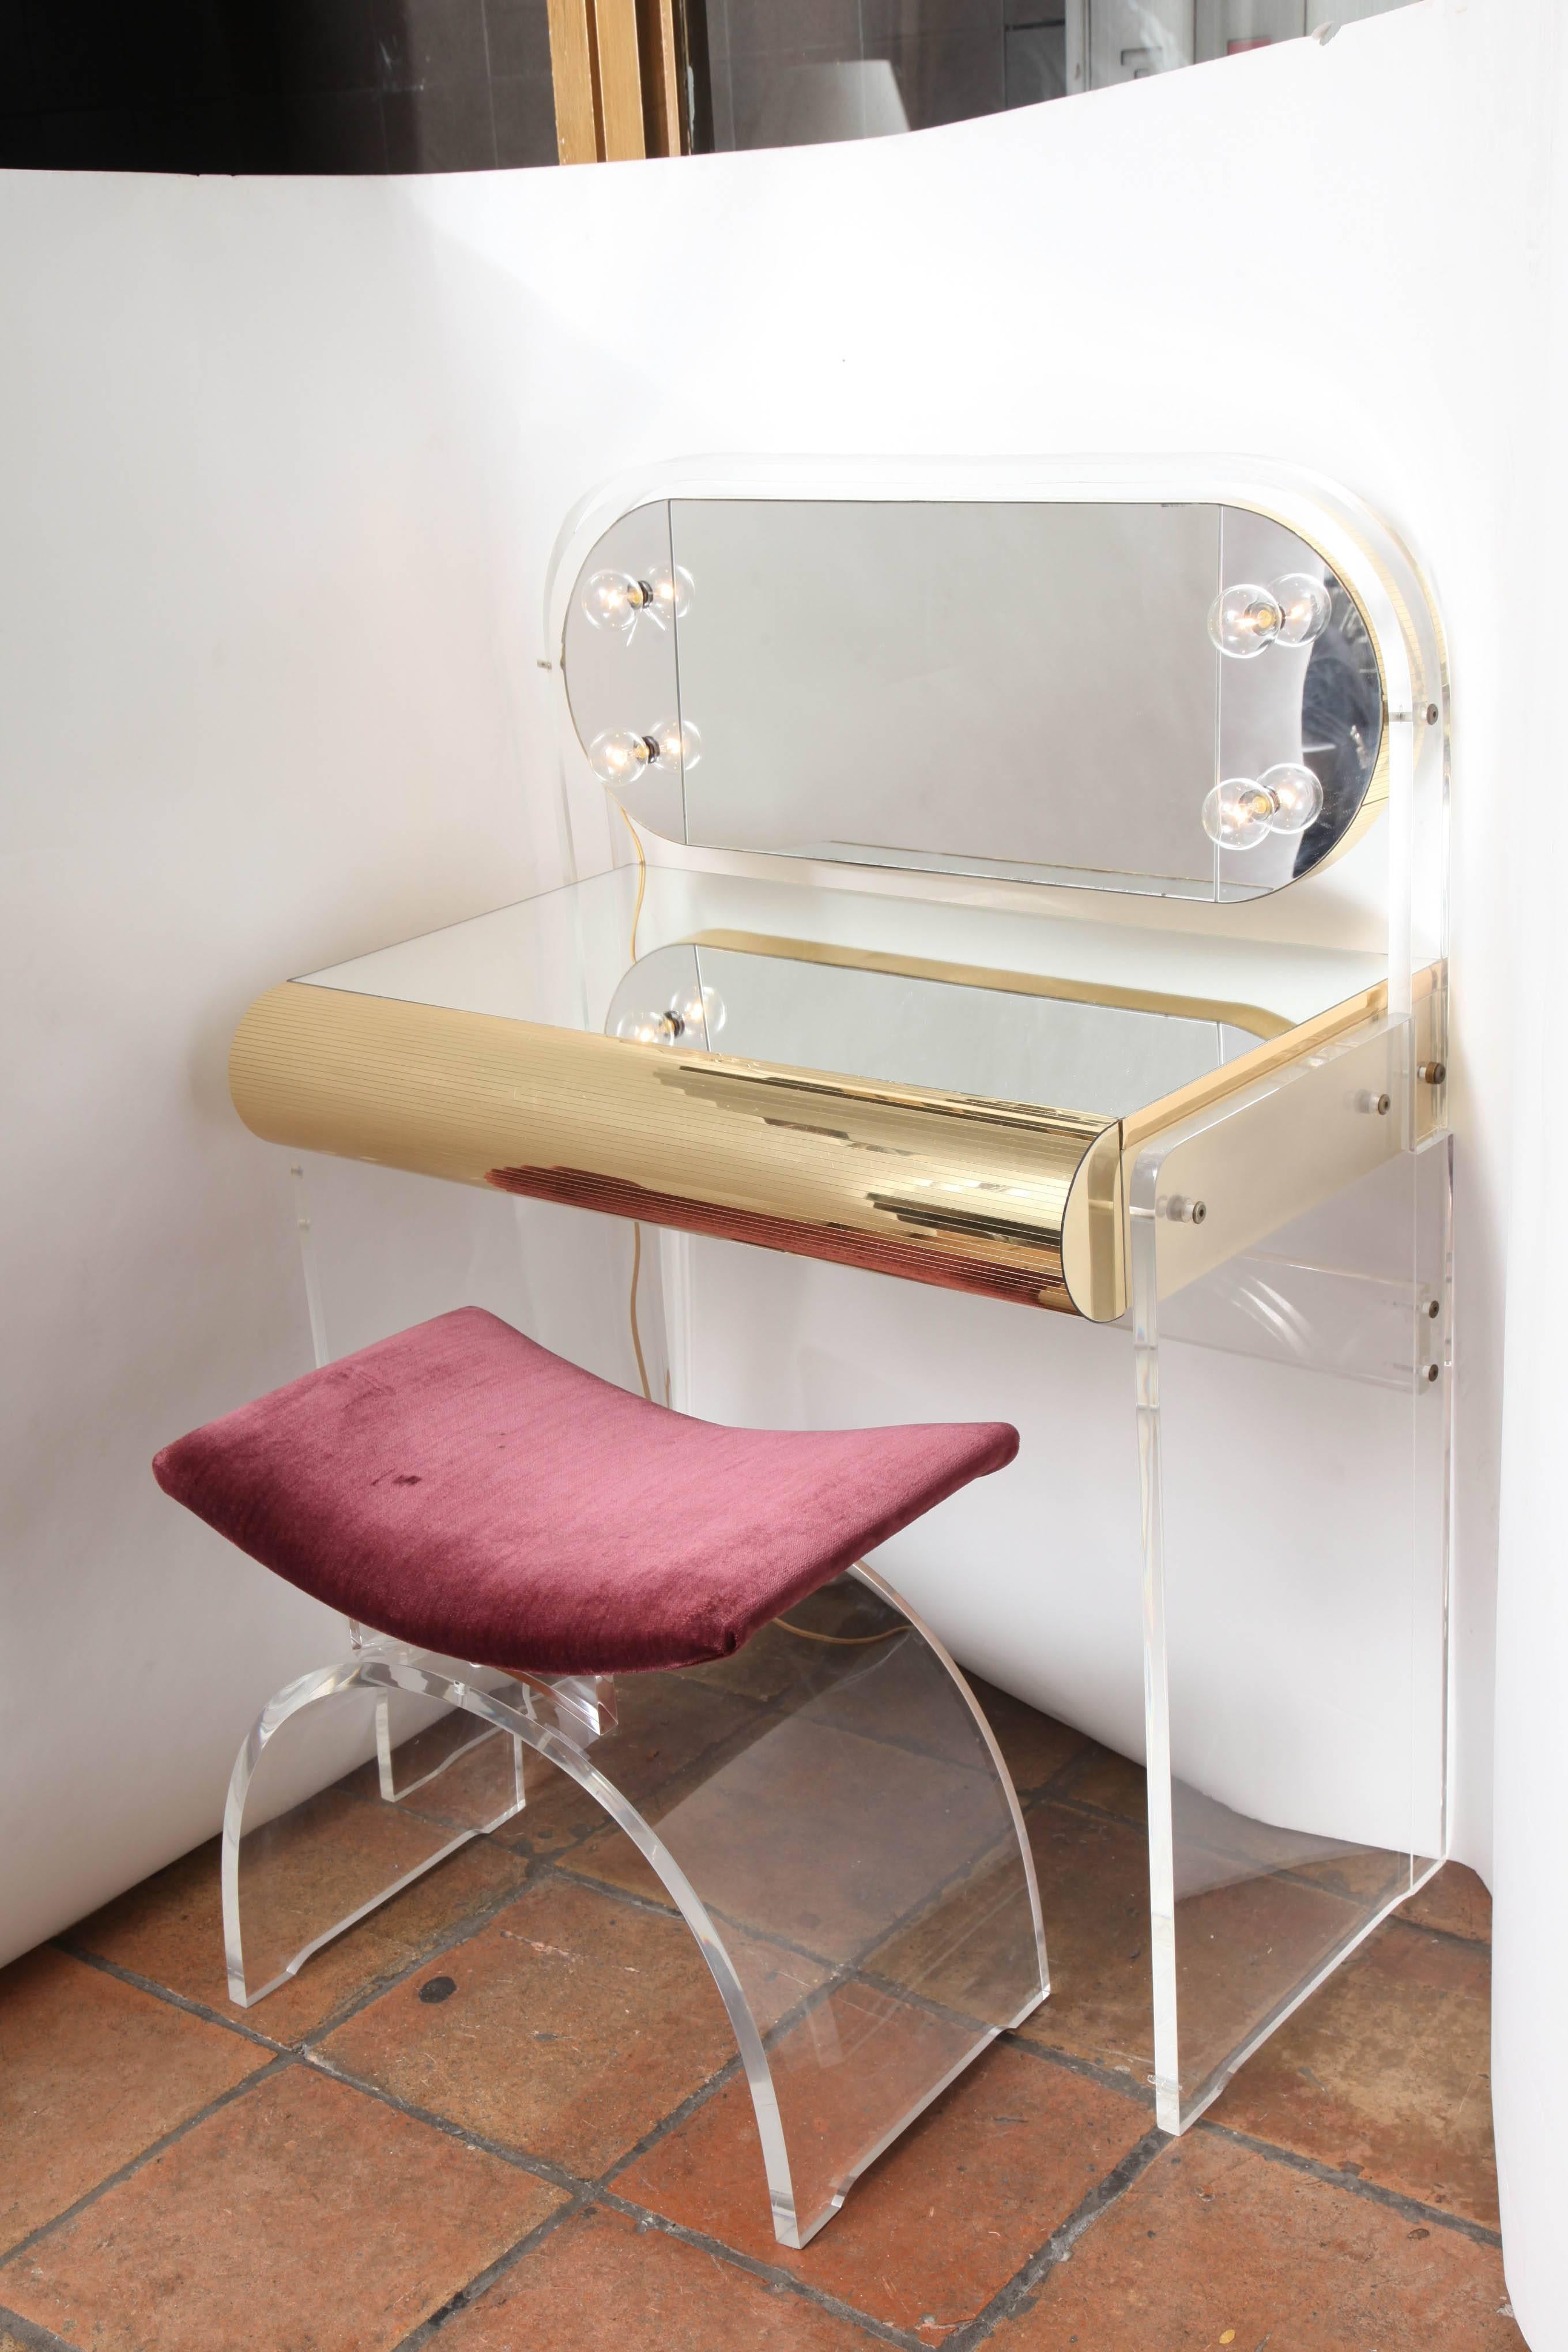 A fabulous mirrored Lucite vanity with matching stool and large single mirrored drawer. The vanity has a curved mirror with four lights framed in Lucite.
The Lucite in these pieces are excellent quality and not distressed or cloudy.